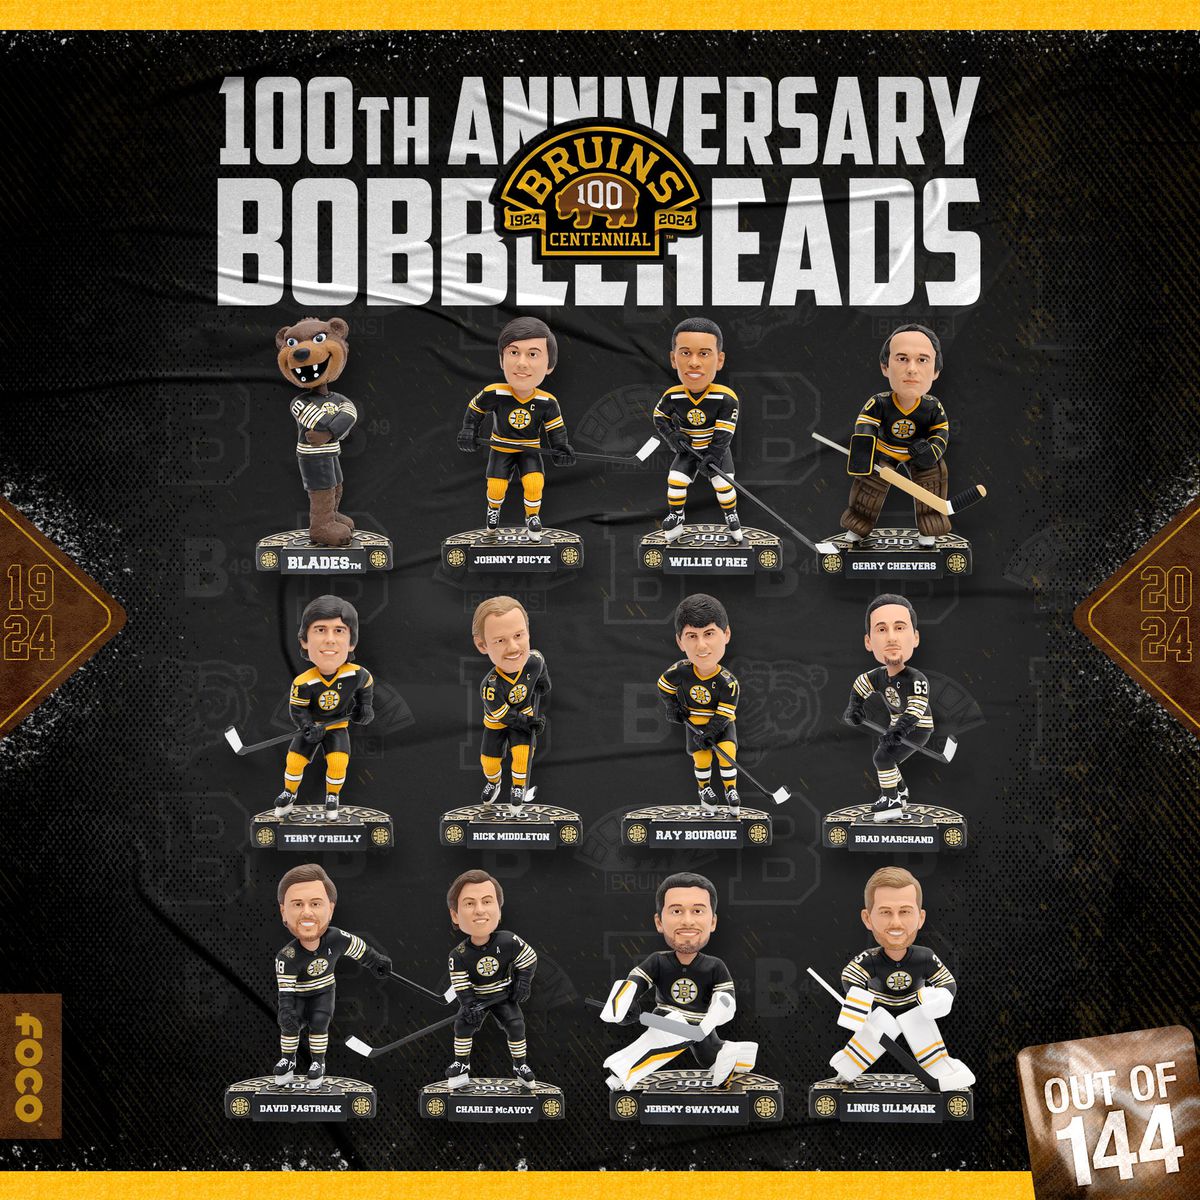 Graphic featuring 12 Boston Bruins bobblehead figurines, three rows of four. Each row features a Bruins player or mascot.